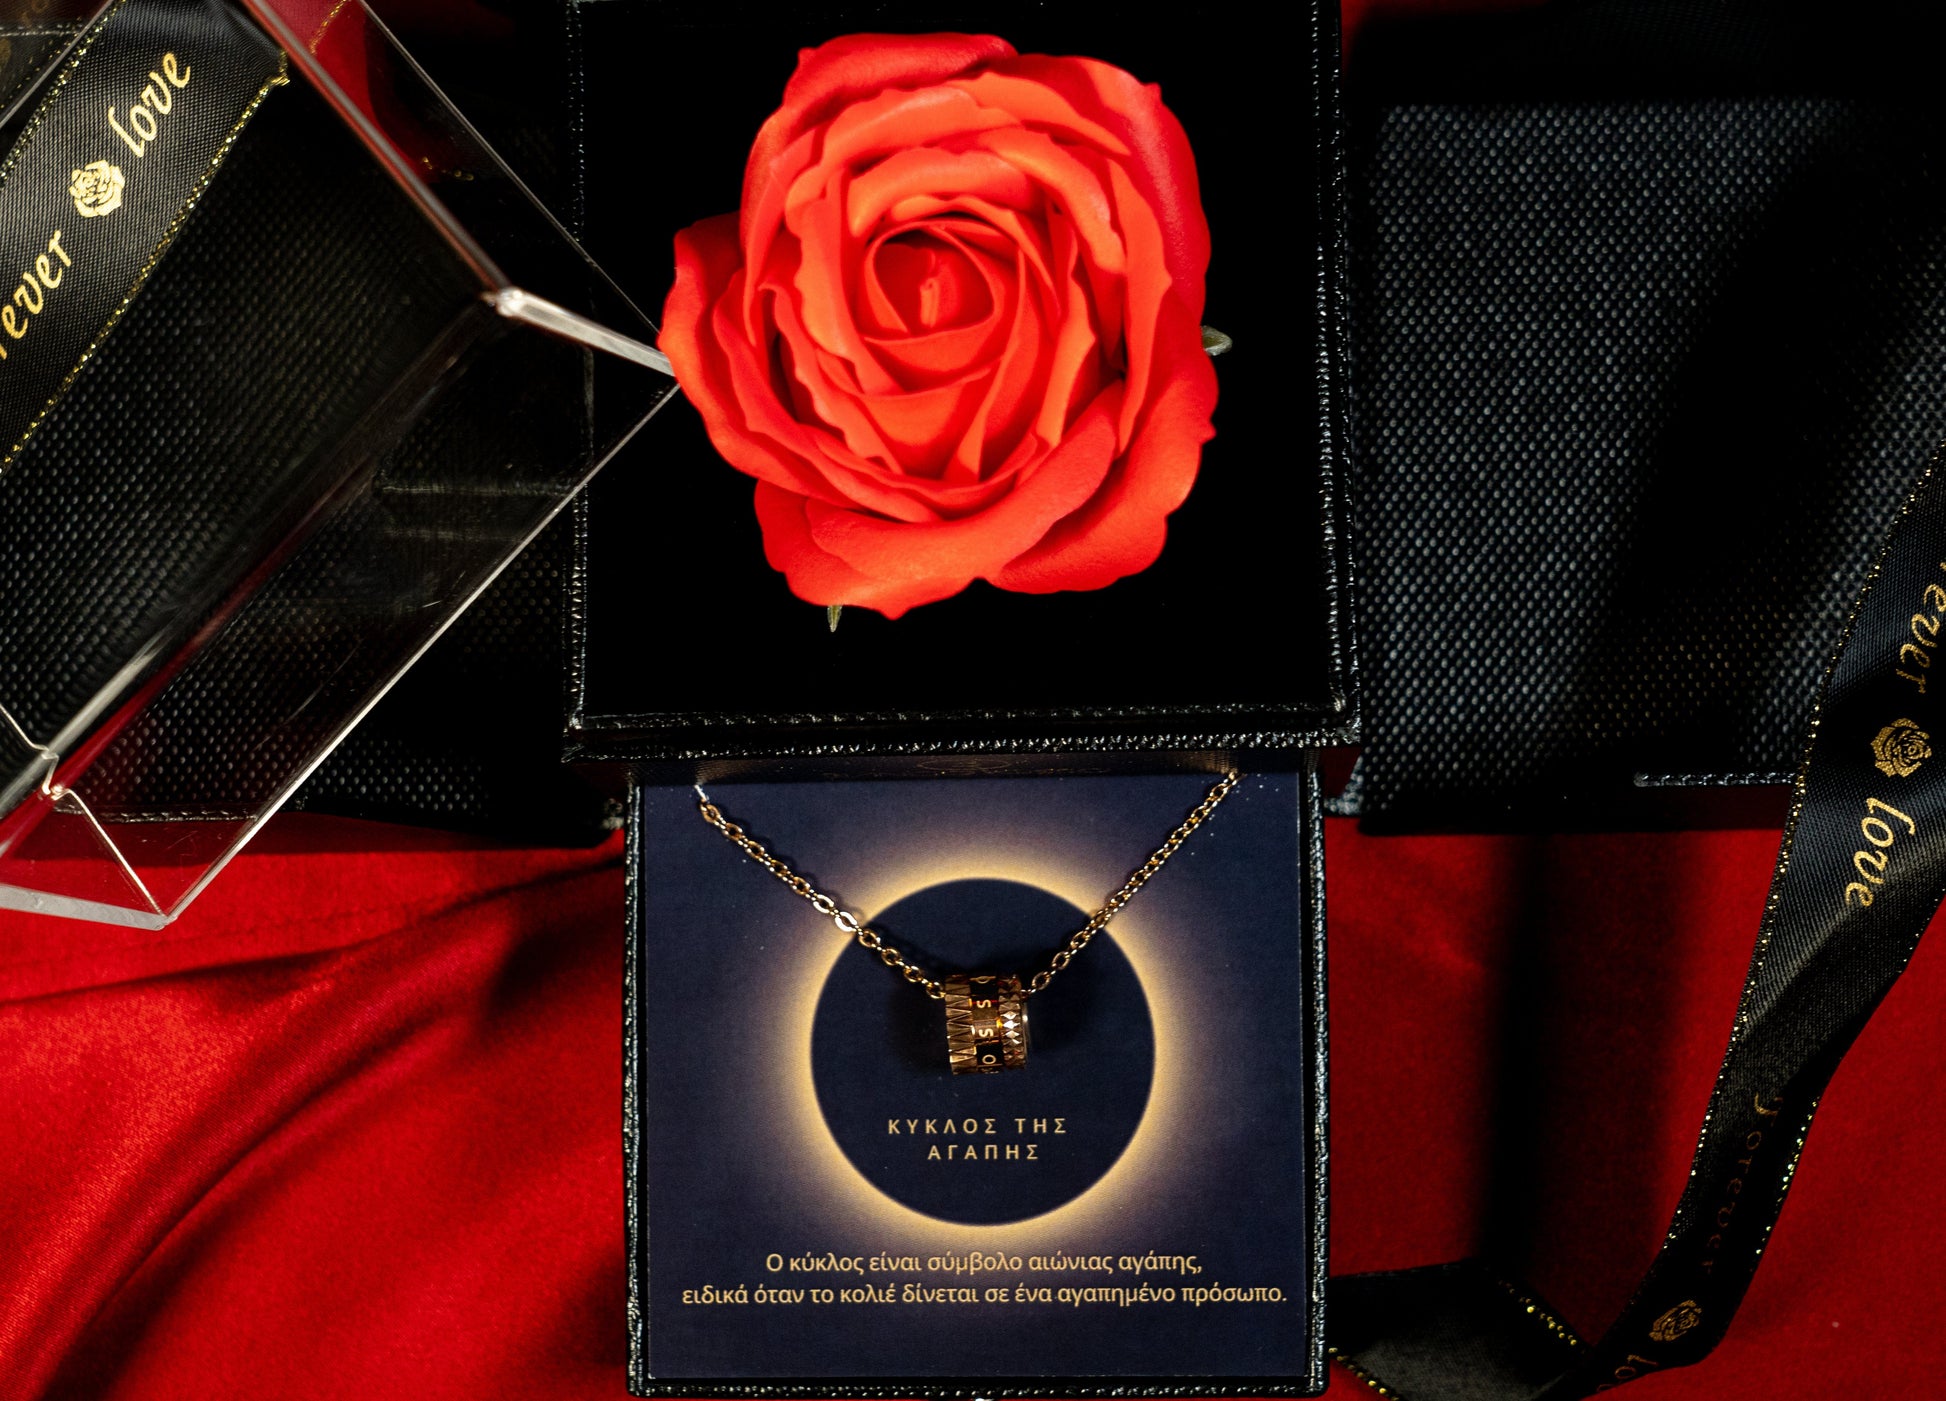 bianco rosso Rose Box Rose Gold Valentine's Gift Box - Circle Of Love cyprus greece jewelry gift free shipping europe worldwide